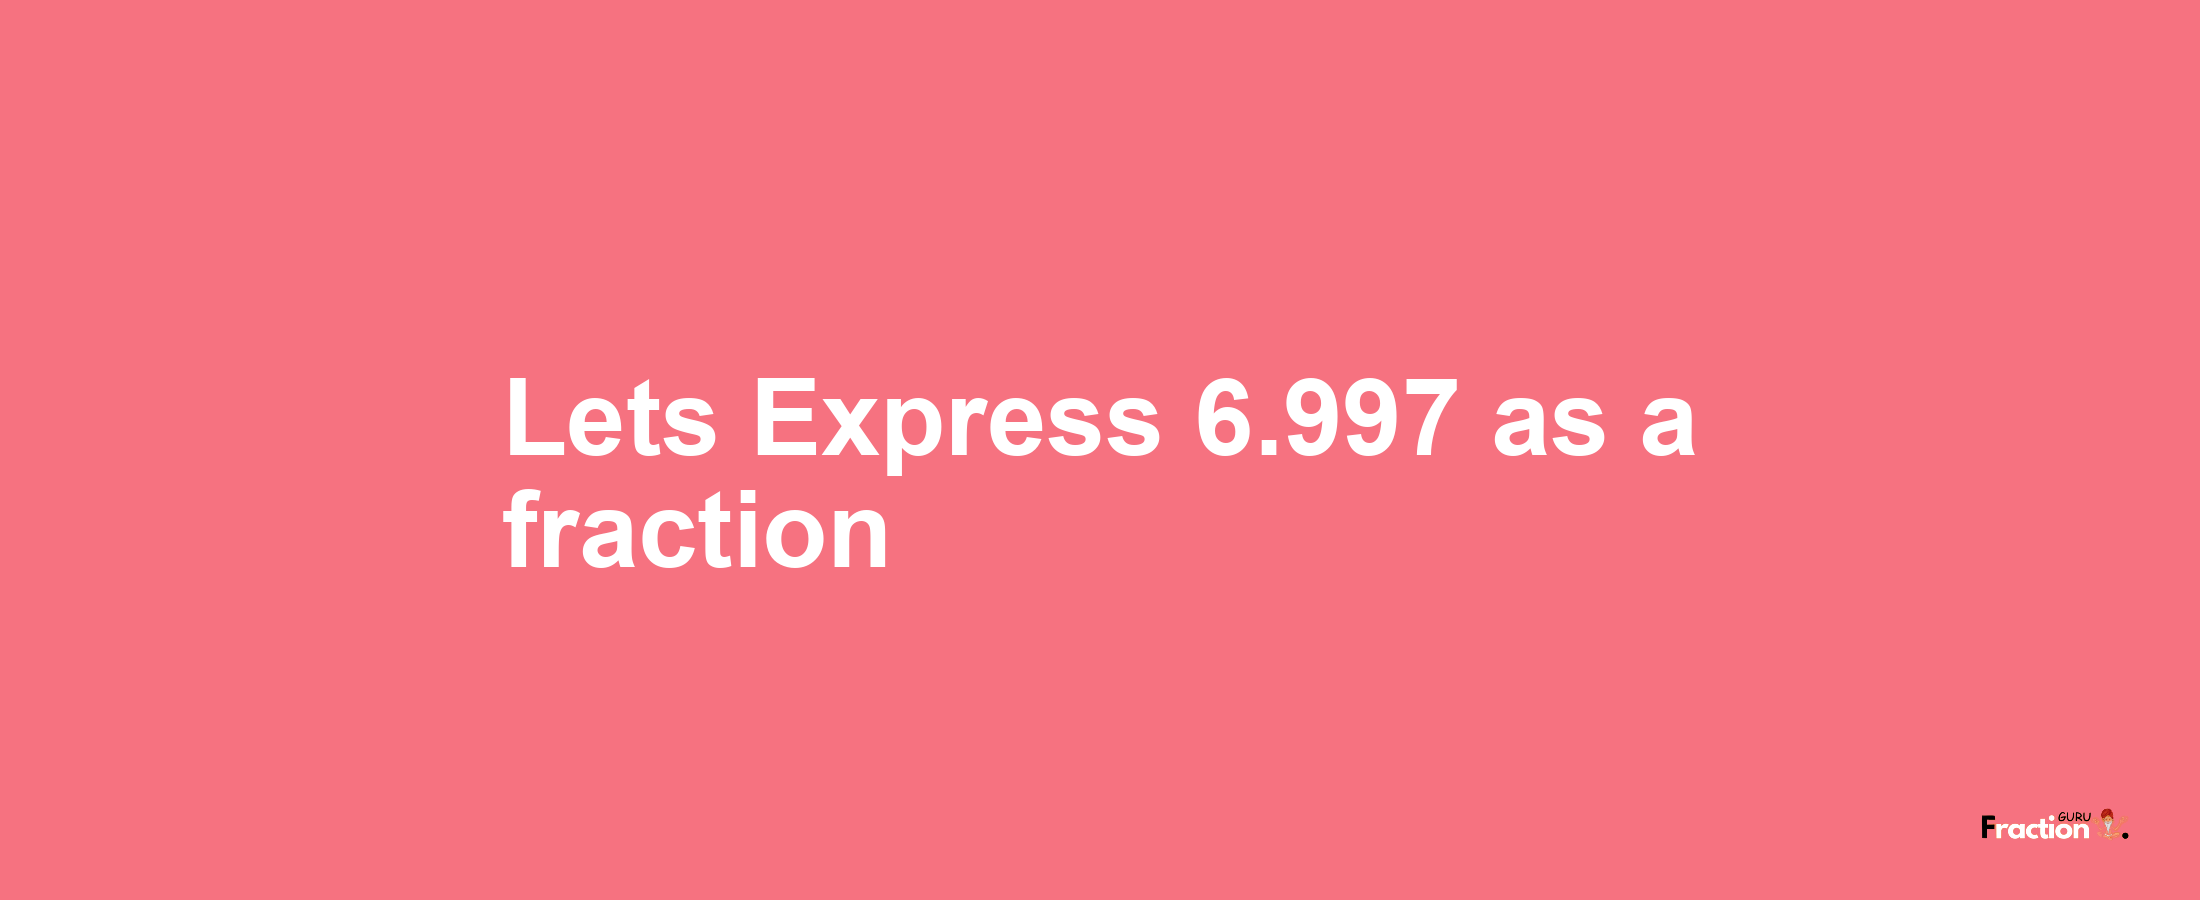 Lets Express 6.997 as afraction